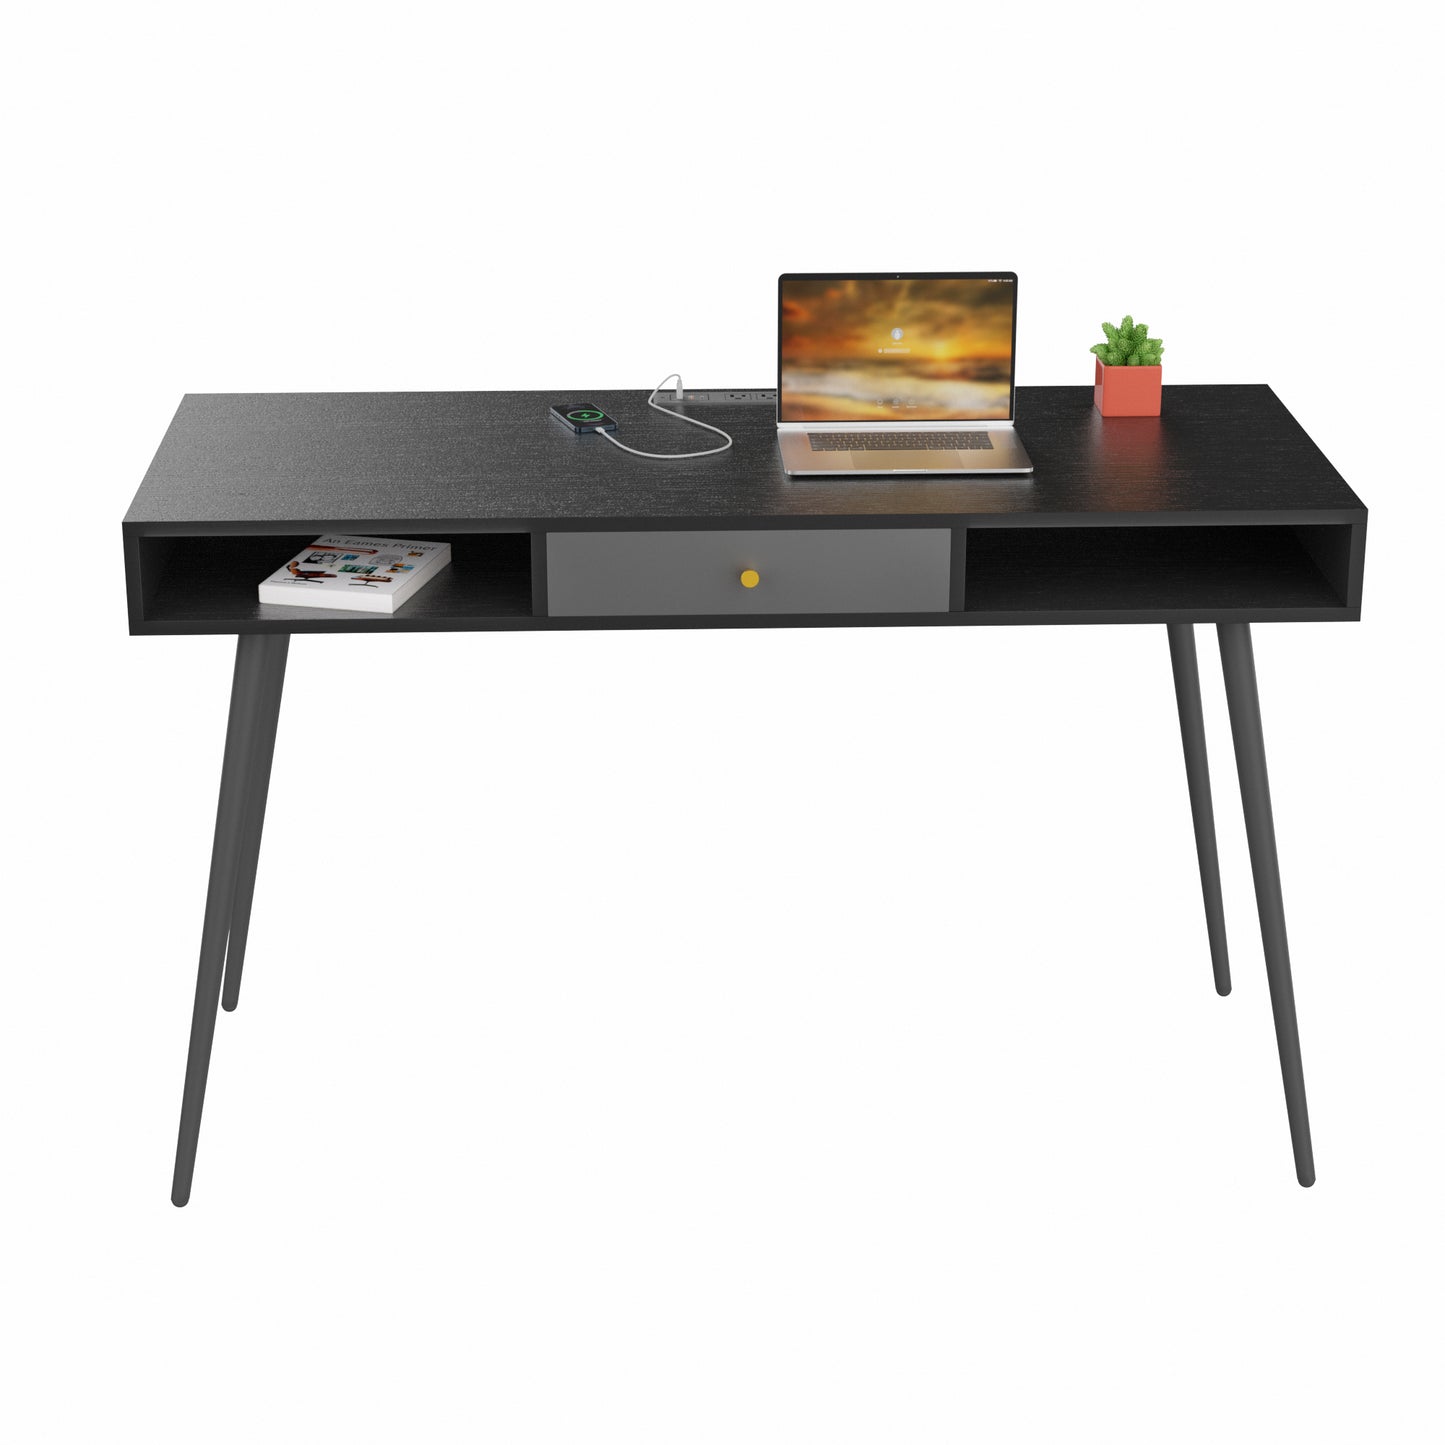 Mid Century Desk with USB Ports and Power Outlet, Modern Writing Study Desk with Drawers, Multifunctional Home Office Computer Desk Black